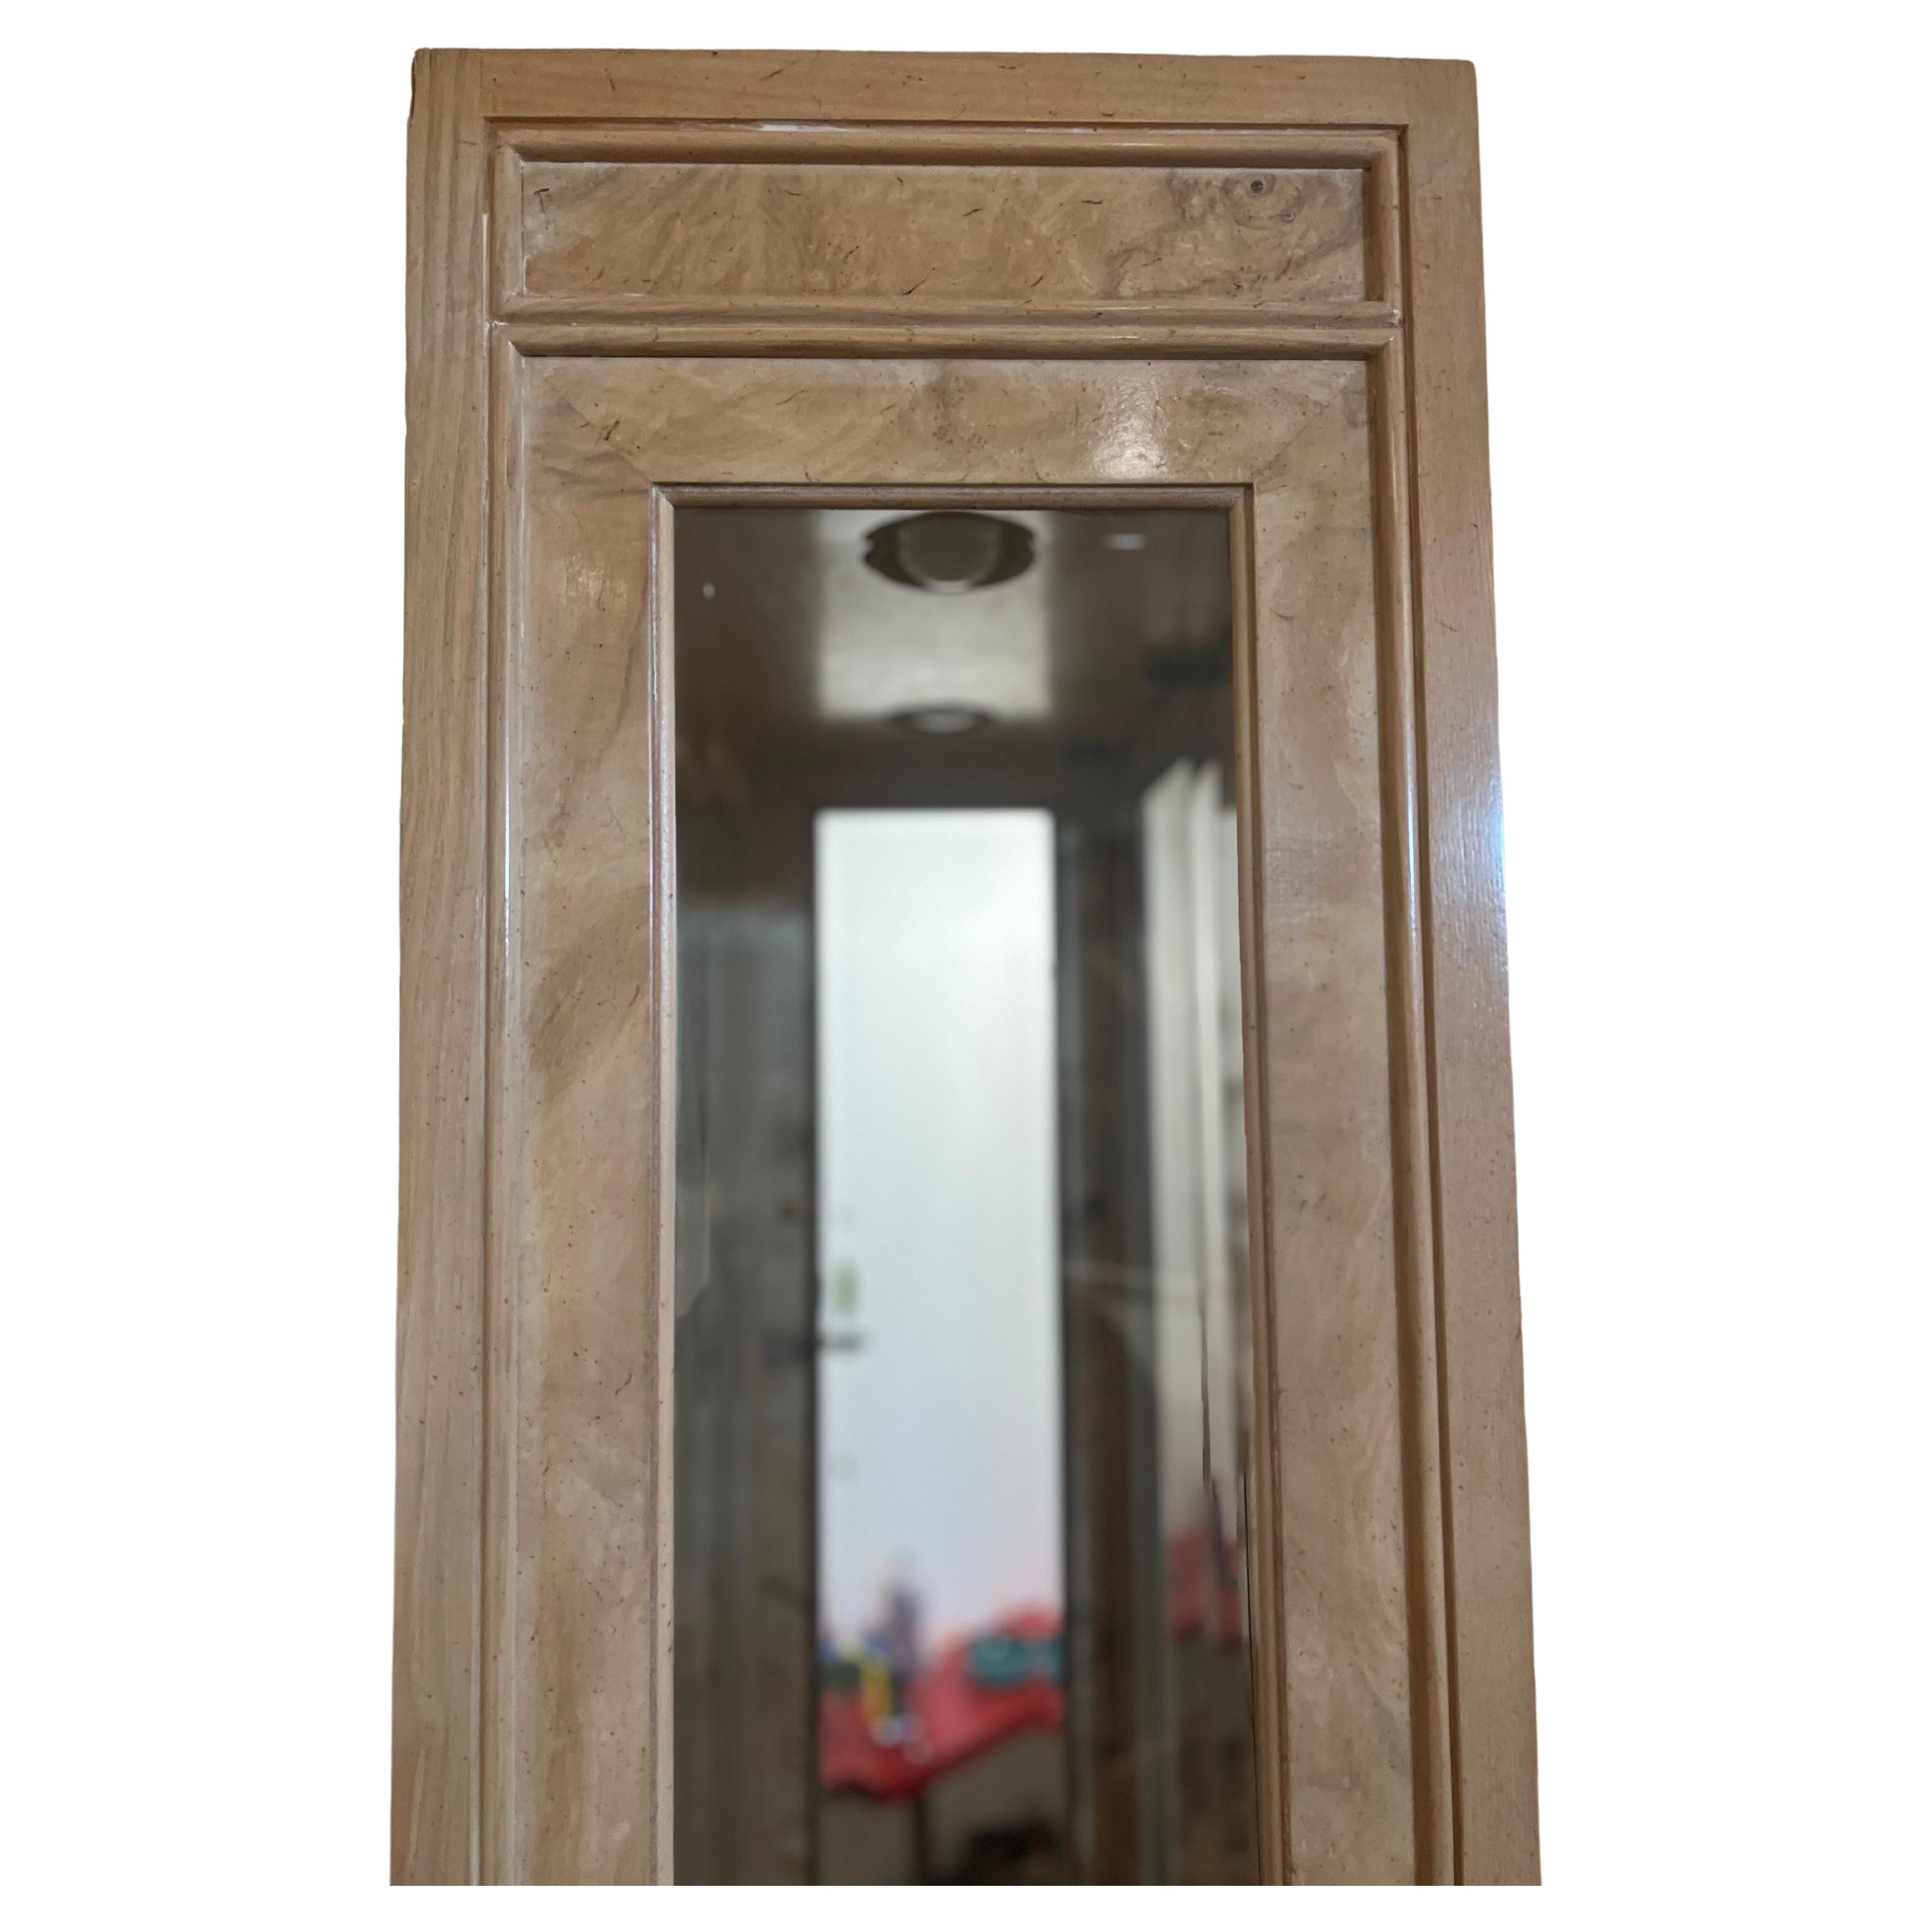 Beautiful elegant double door mirrored glass cabinet, lighted interior with black lacquer flat base comes with 3 thick glass shelves, its in great condition very elegant with brass handles in very nice condition.